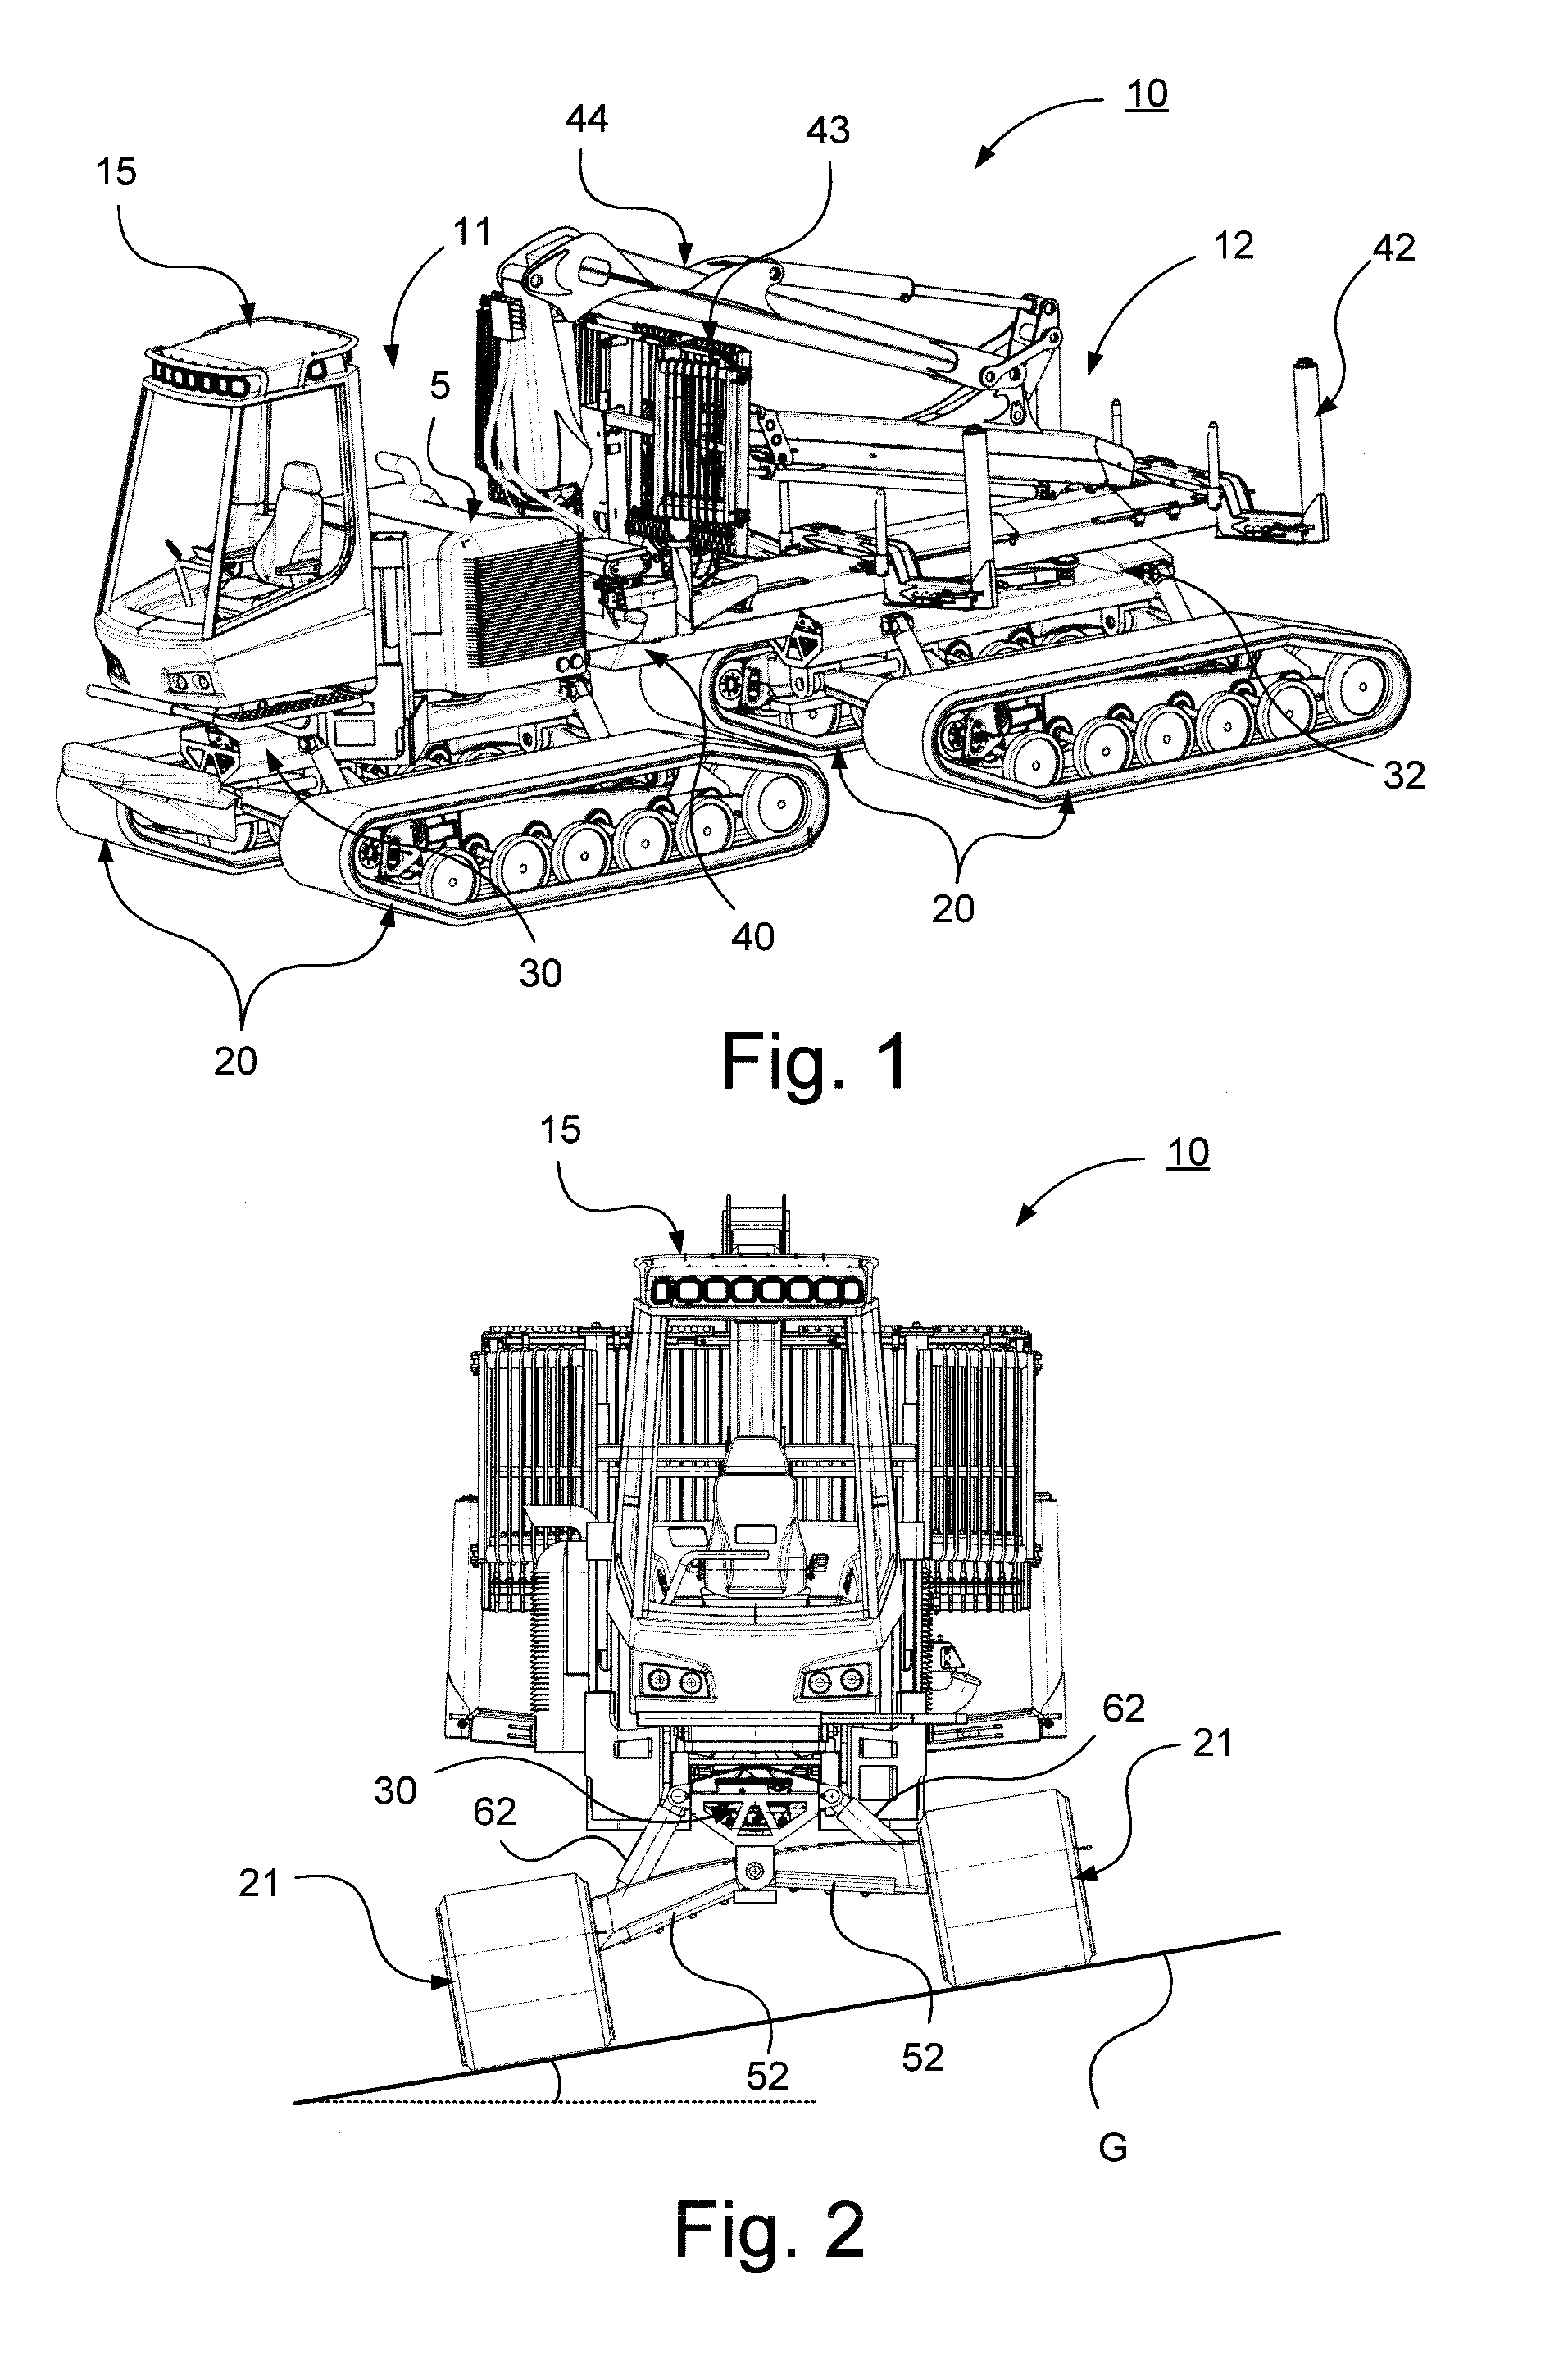 Suspension device for tracked vehicle